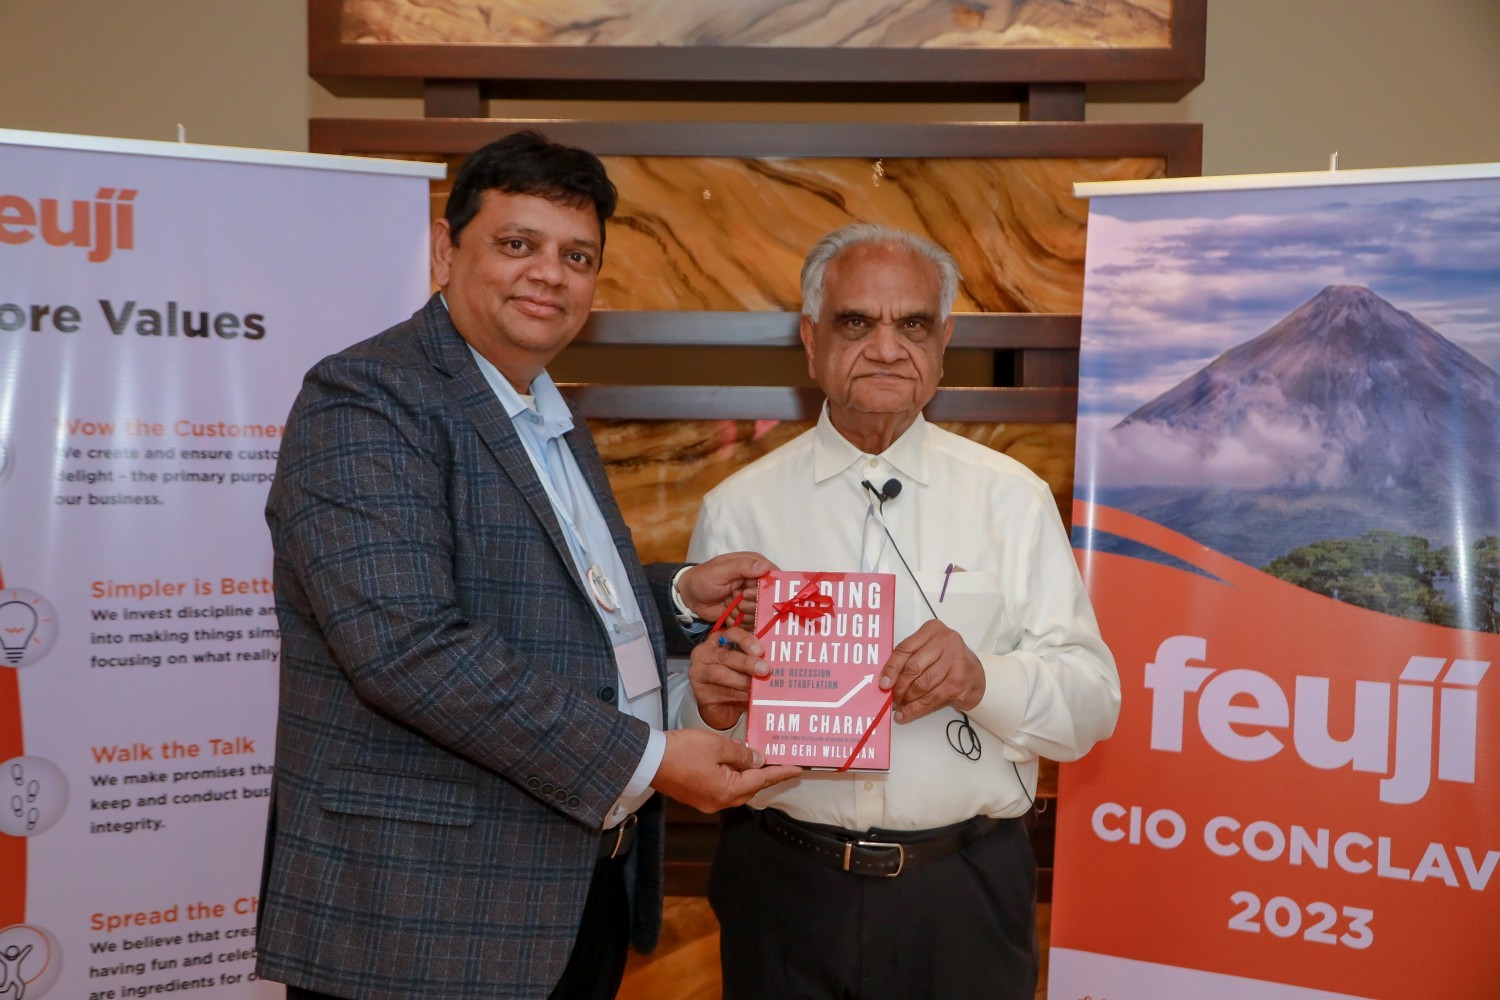 CHAIRMAN, DR. RAM CHARAN WITH CEO, MANOHAR REDDY - TWO VISIONARY LEADERS AT FEUJI'S CIO CONCLAVE 2023